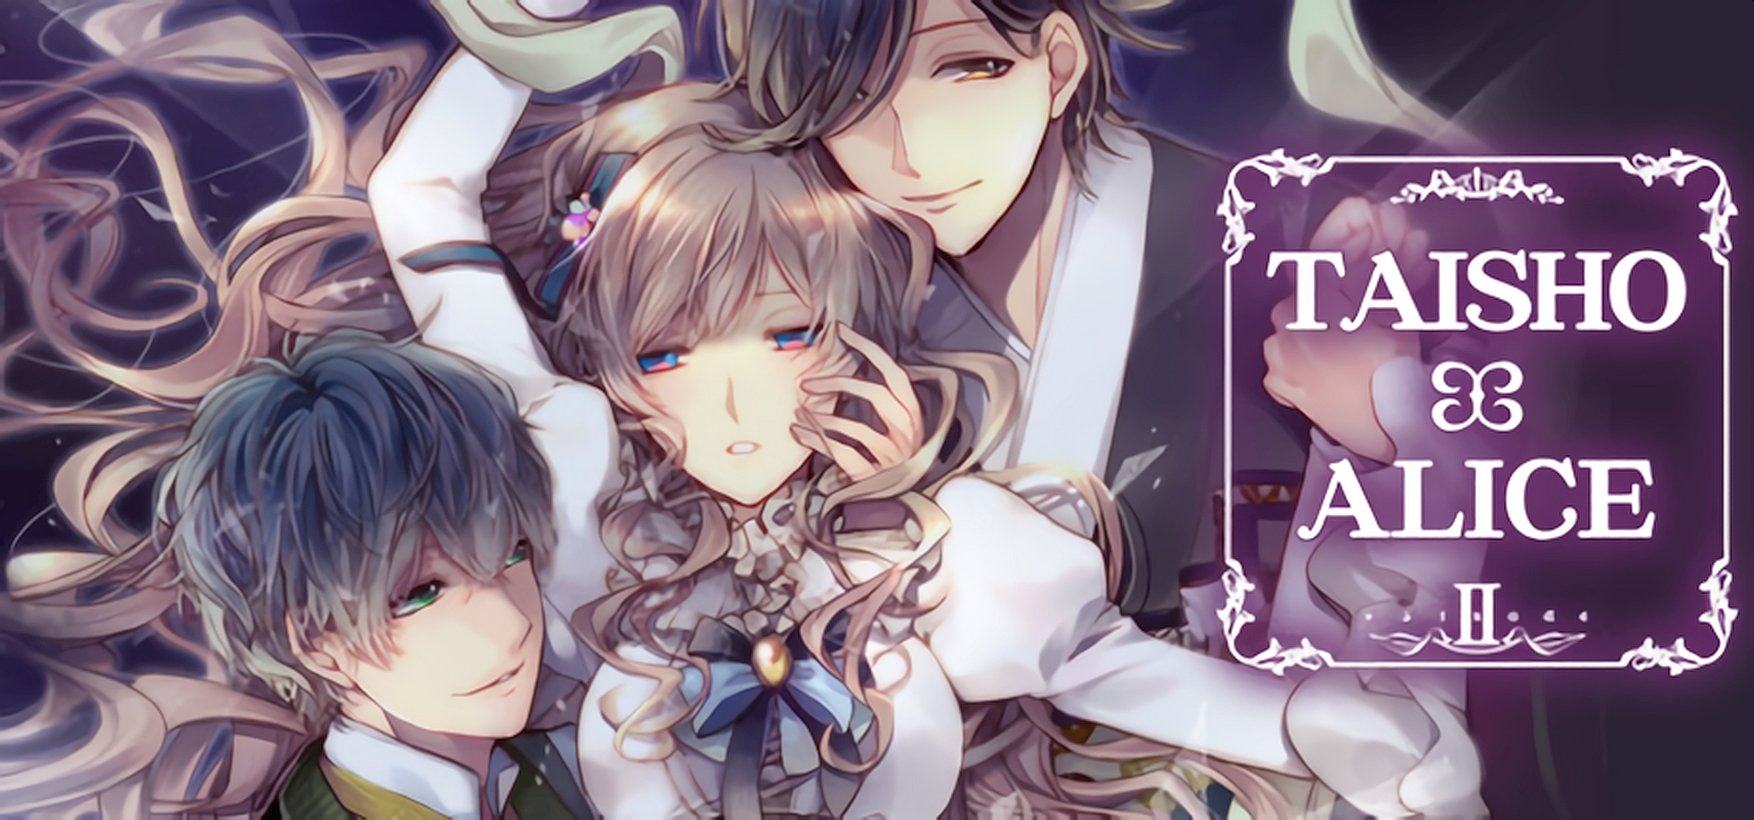 Taisho x Alice Episode 2 Otome Review – All Aboard the Loco Locomotive